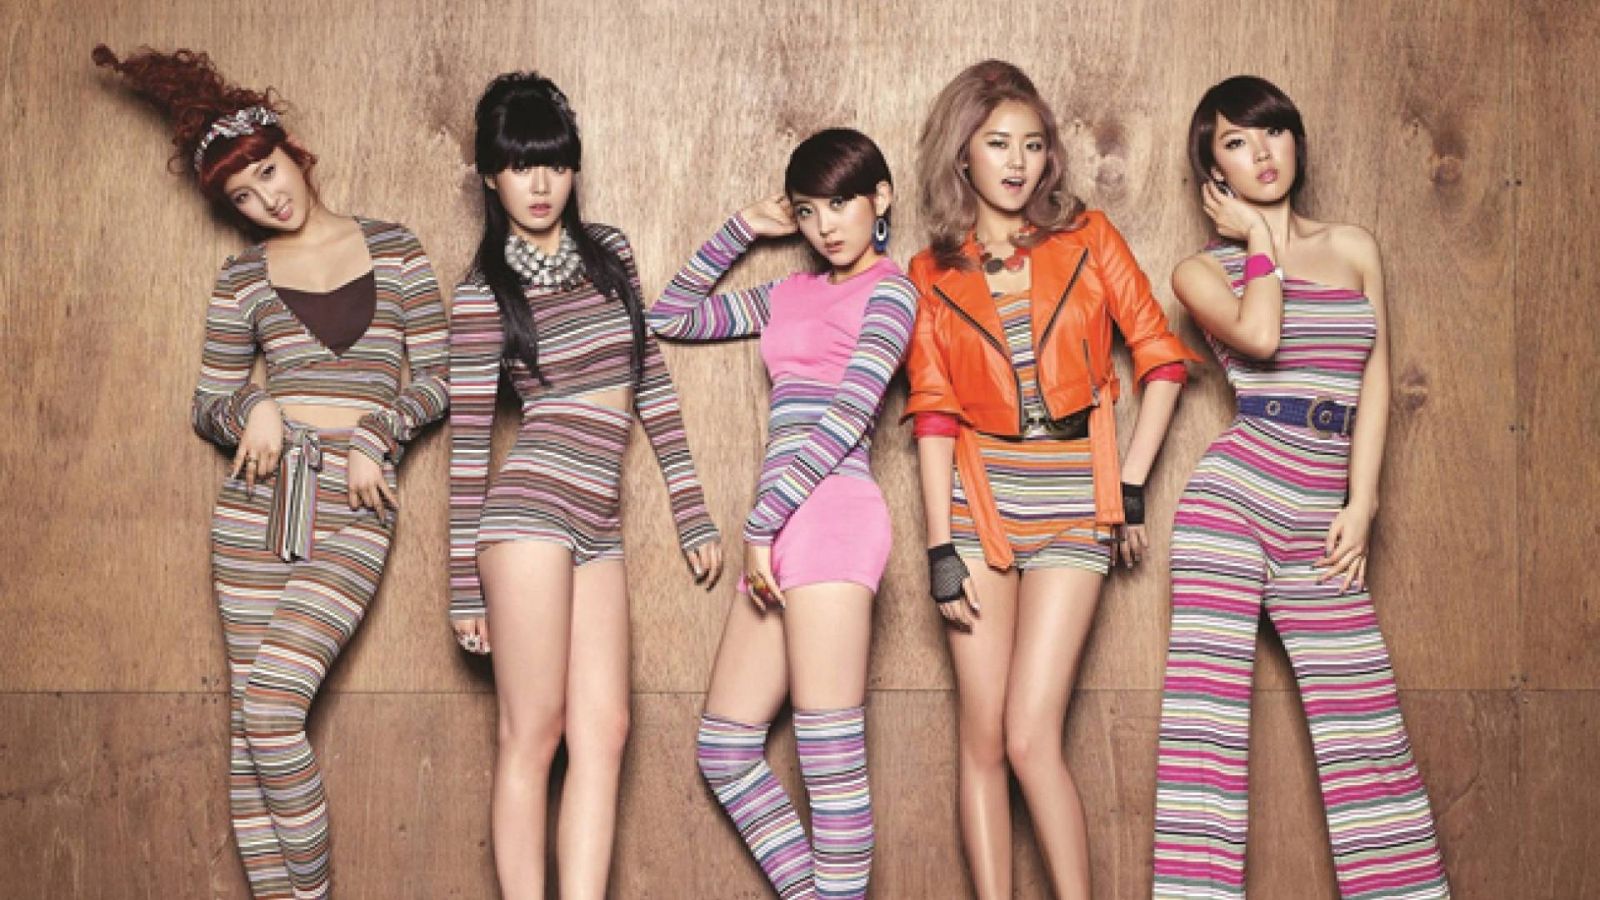 4minute to Release 6th Japanese Single © 4Minute